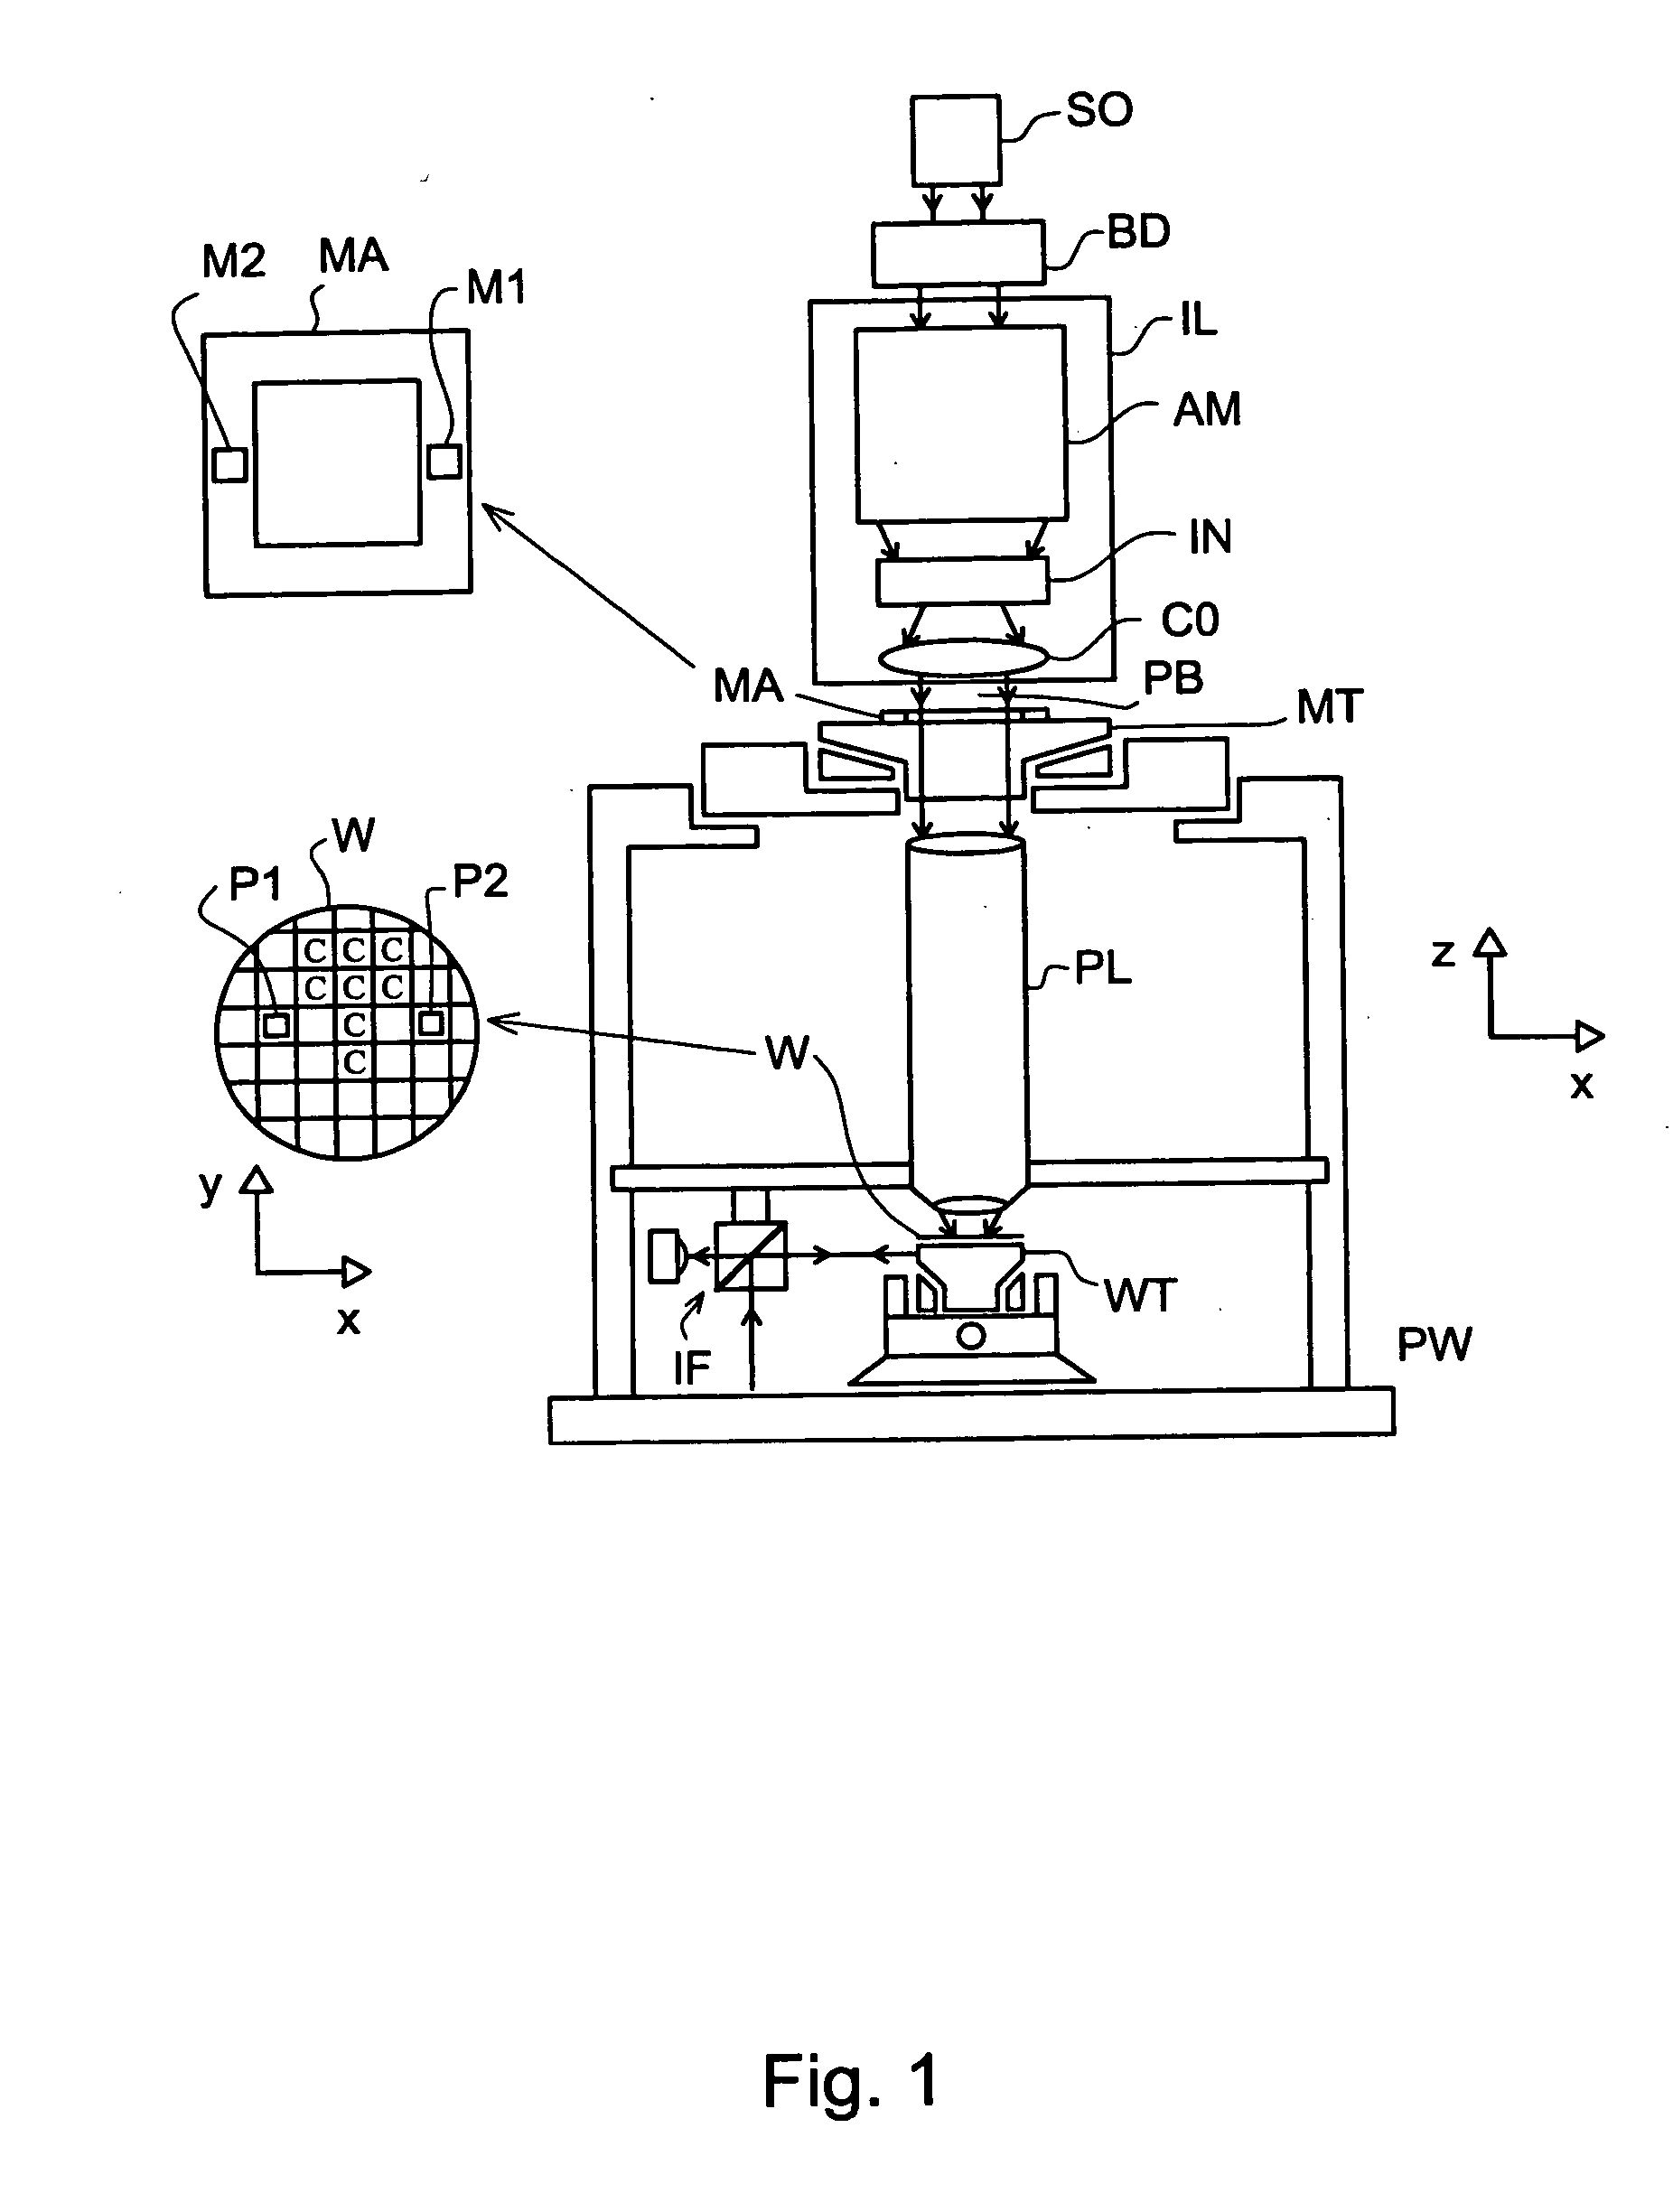 Lithographic apparatus and method for determining Z position errors/variations and substrate table flatness